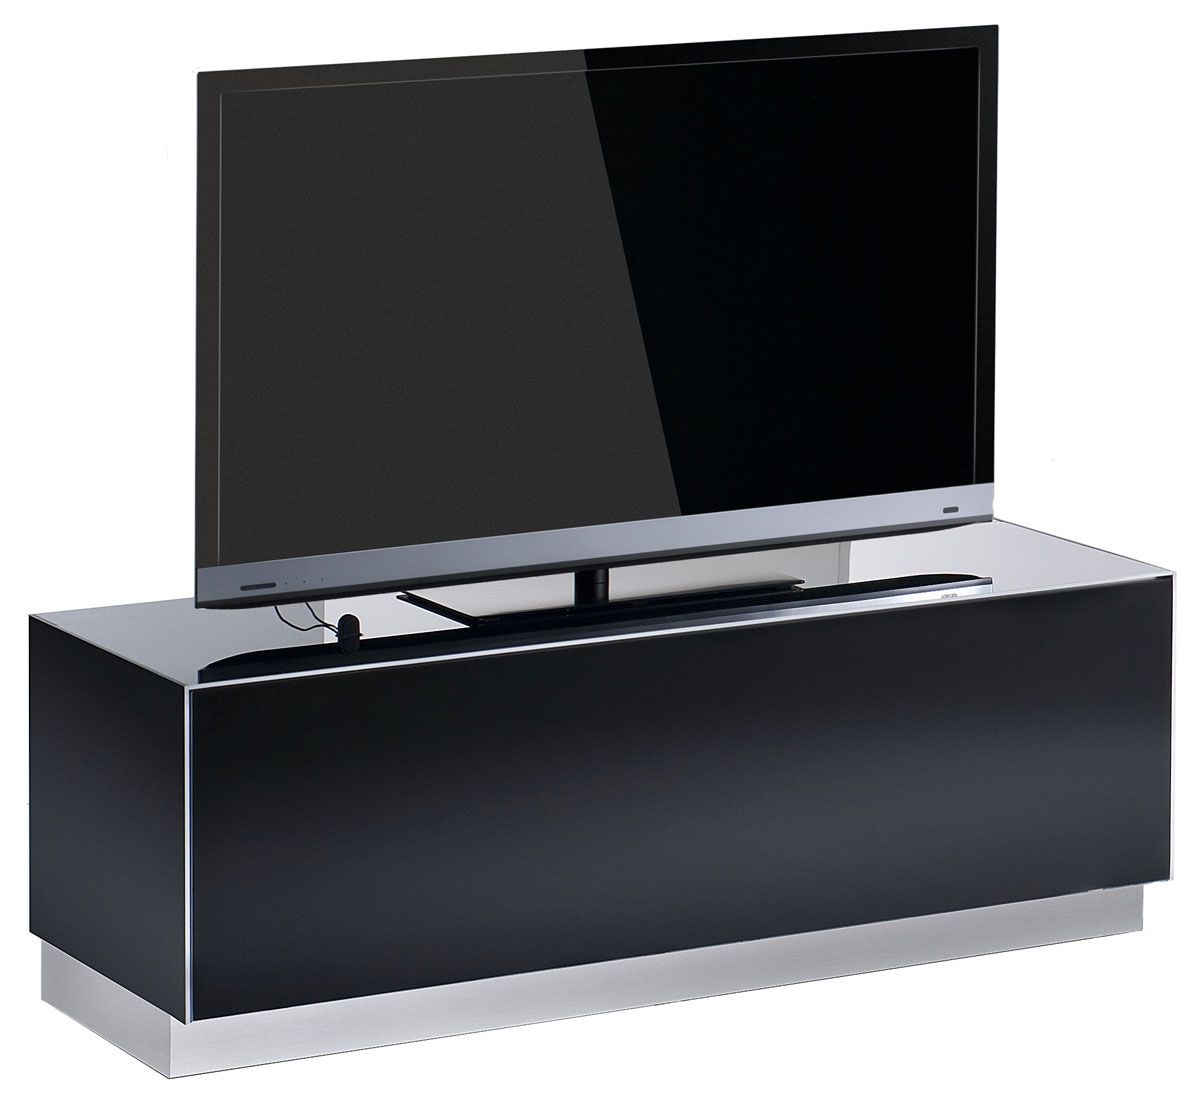 Sonorous Emx 13040 Black Elements Tv Stand For Up To 55 For Sonorous Tv Cabinets (View 4 of 15)